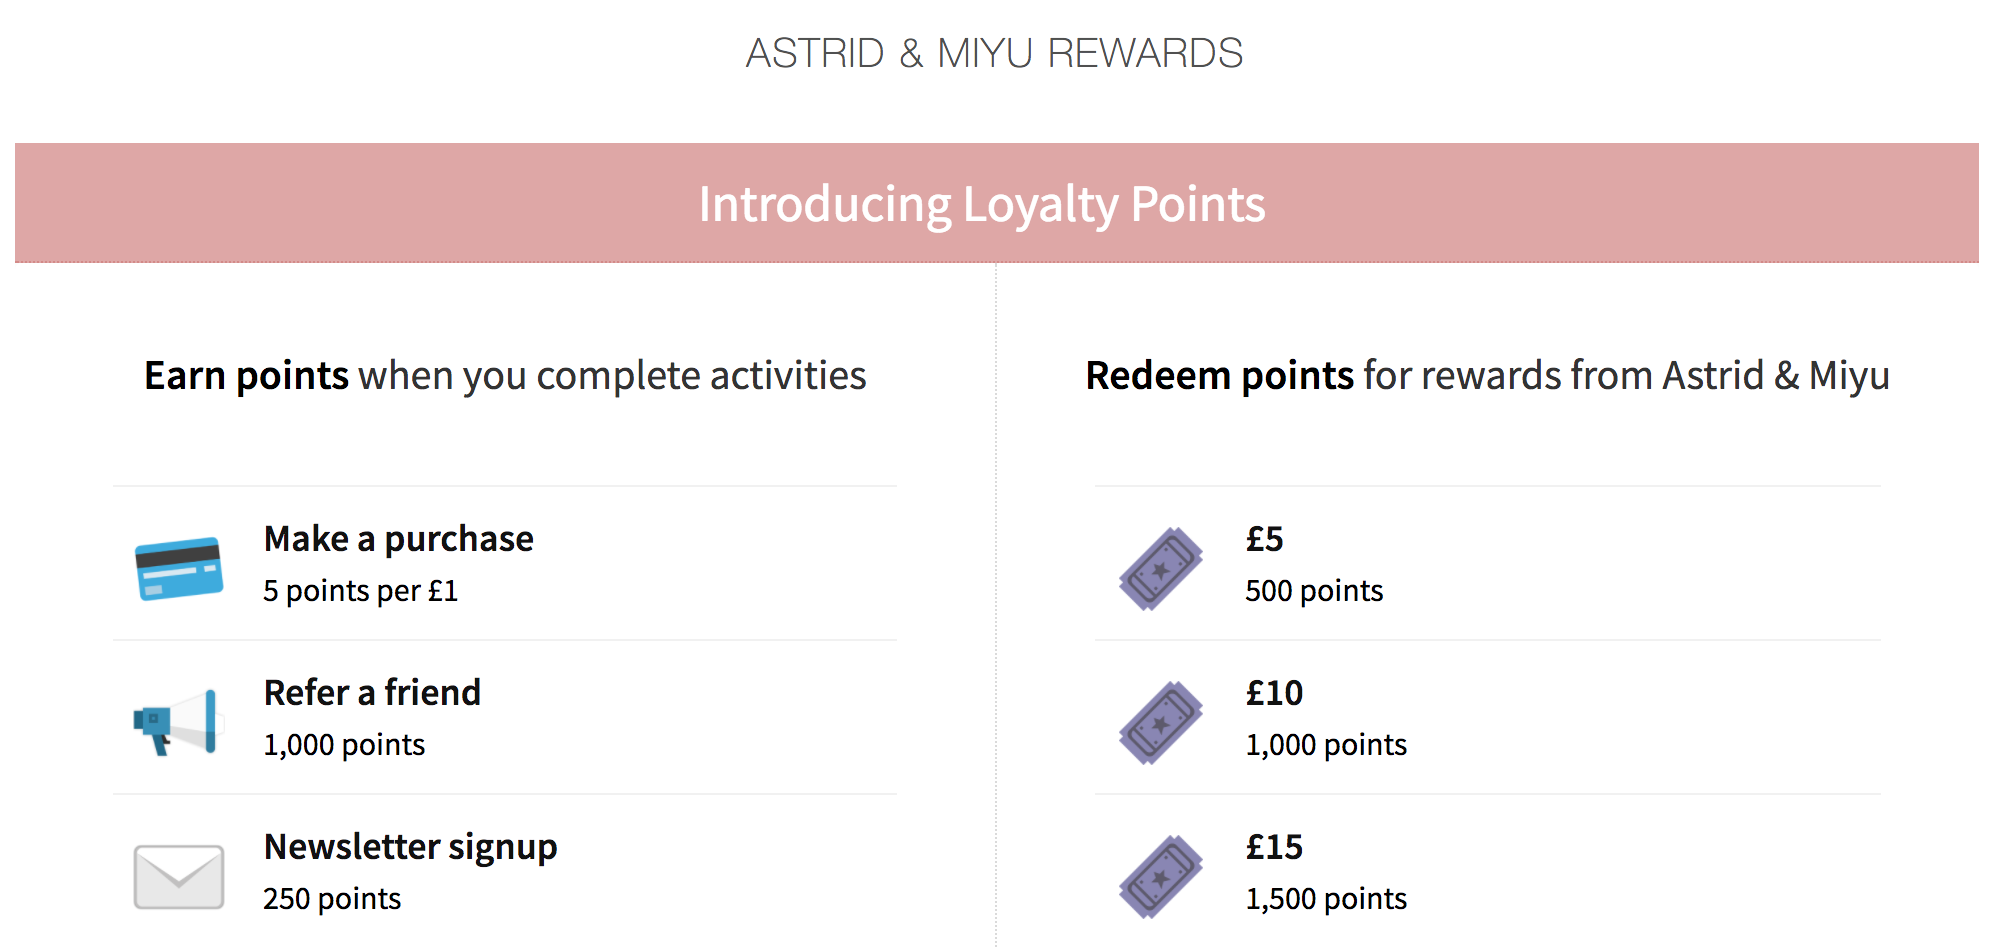 The activities Astrid & Miyu rewards with redeemable points